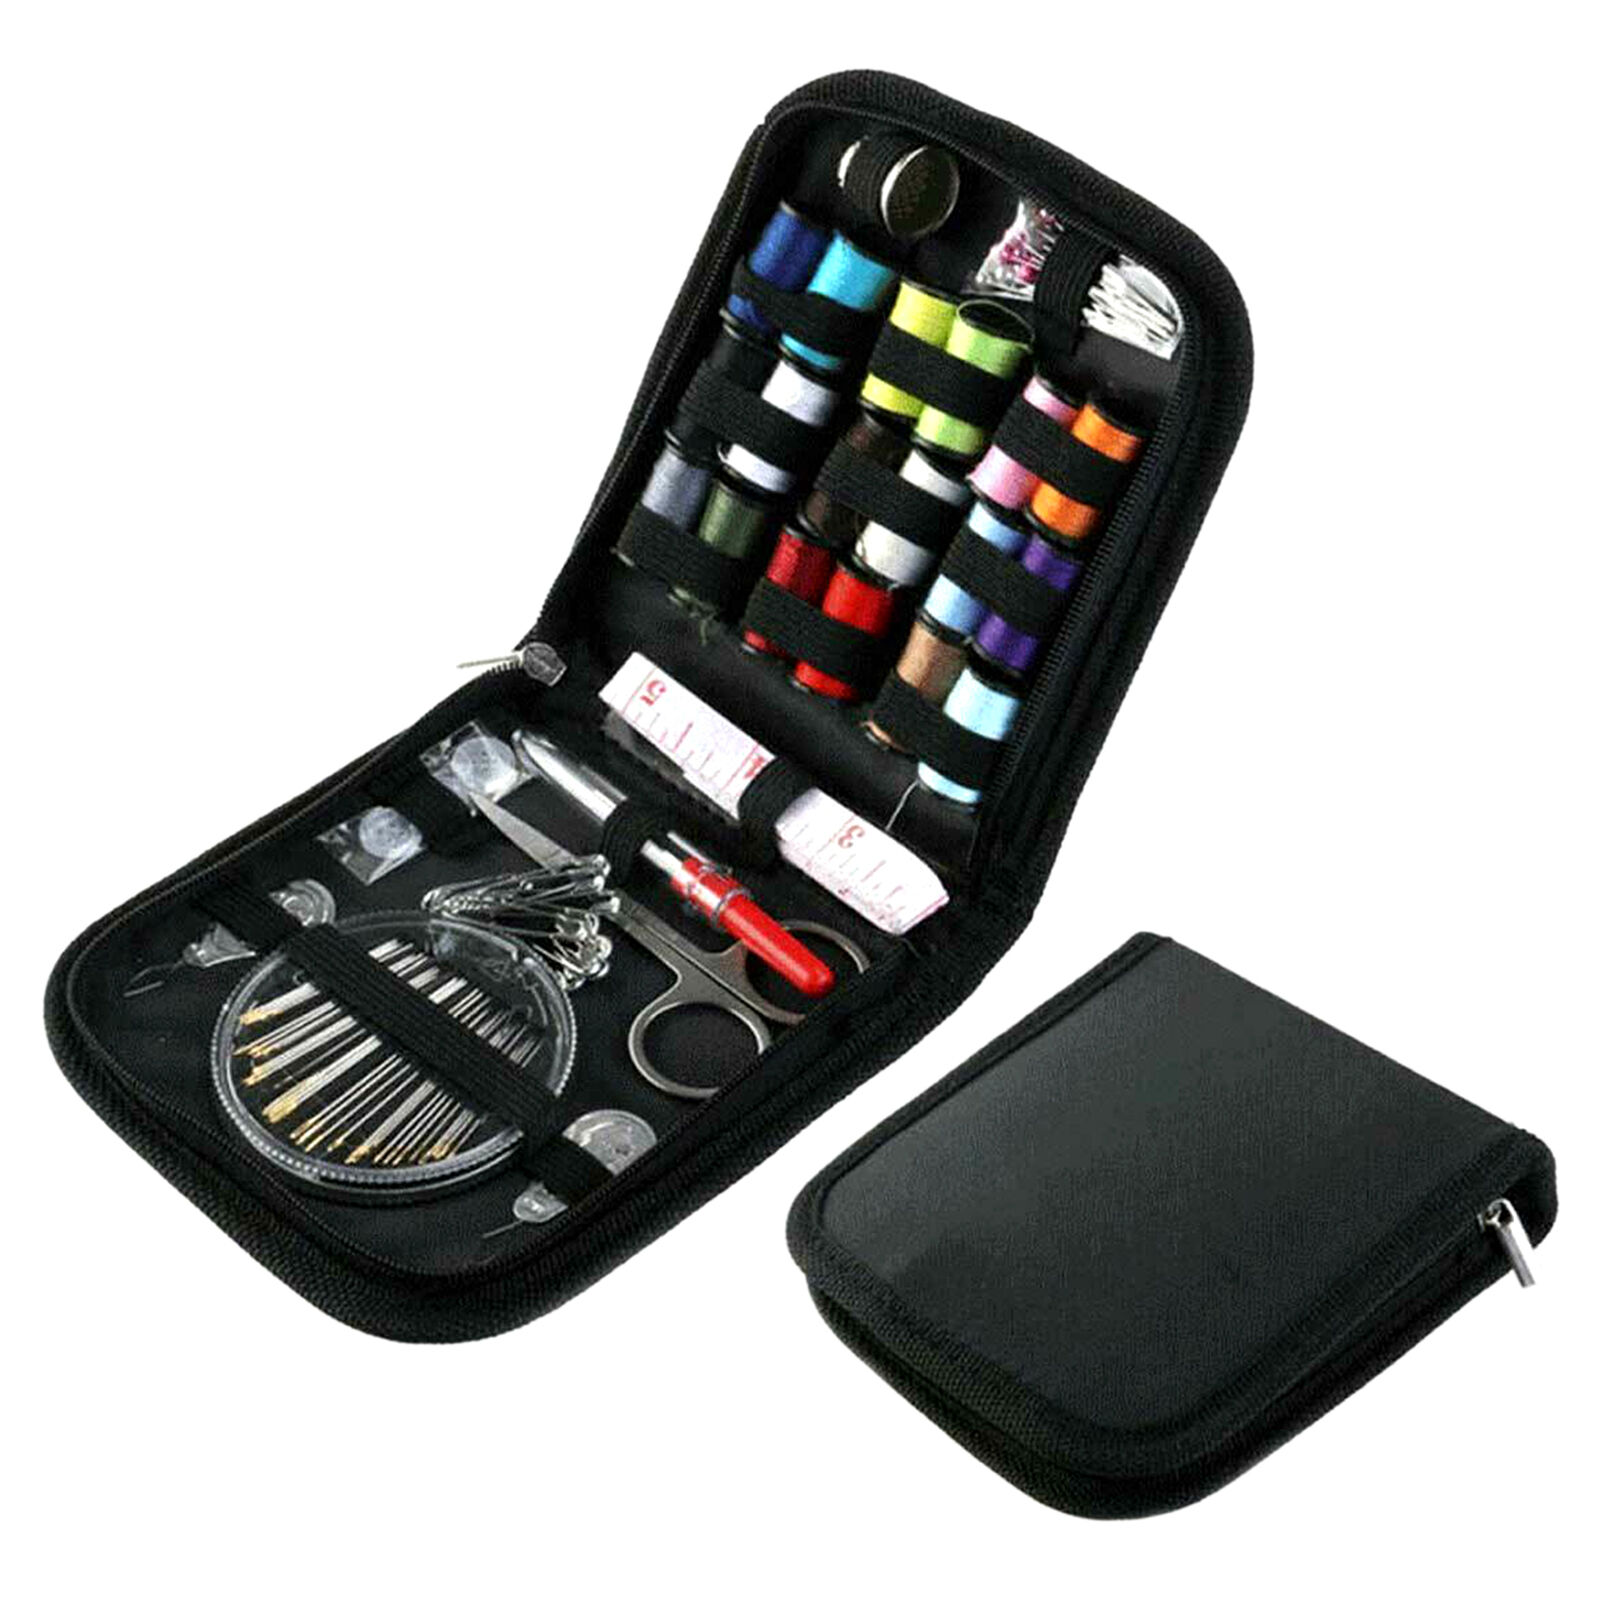 Sewing Kit 70Pcs DIY Sewing Supplies Basic Hand Sewing Kit for Beginner A5F9